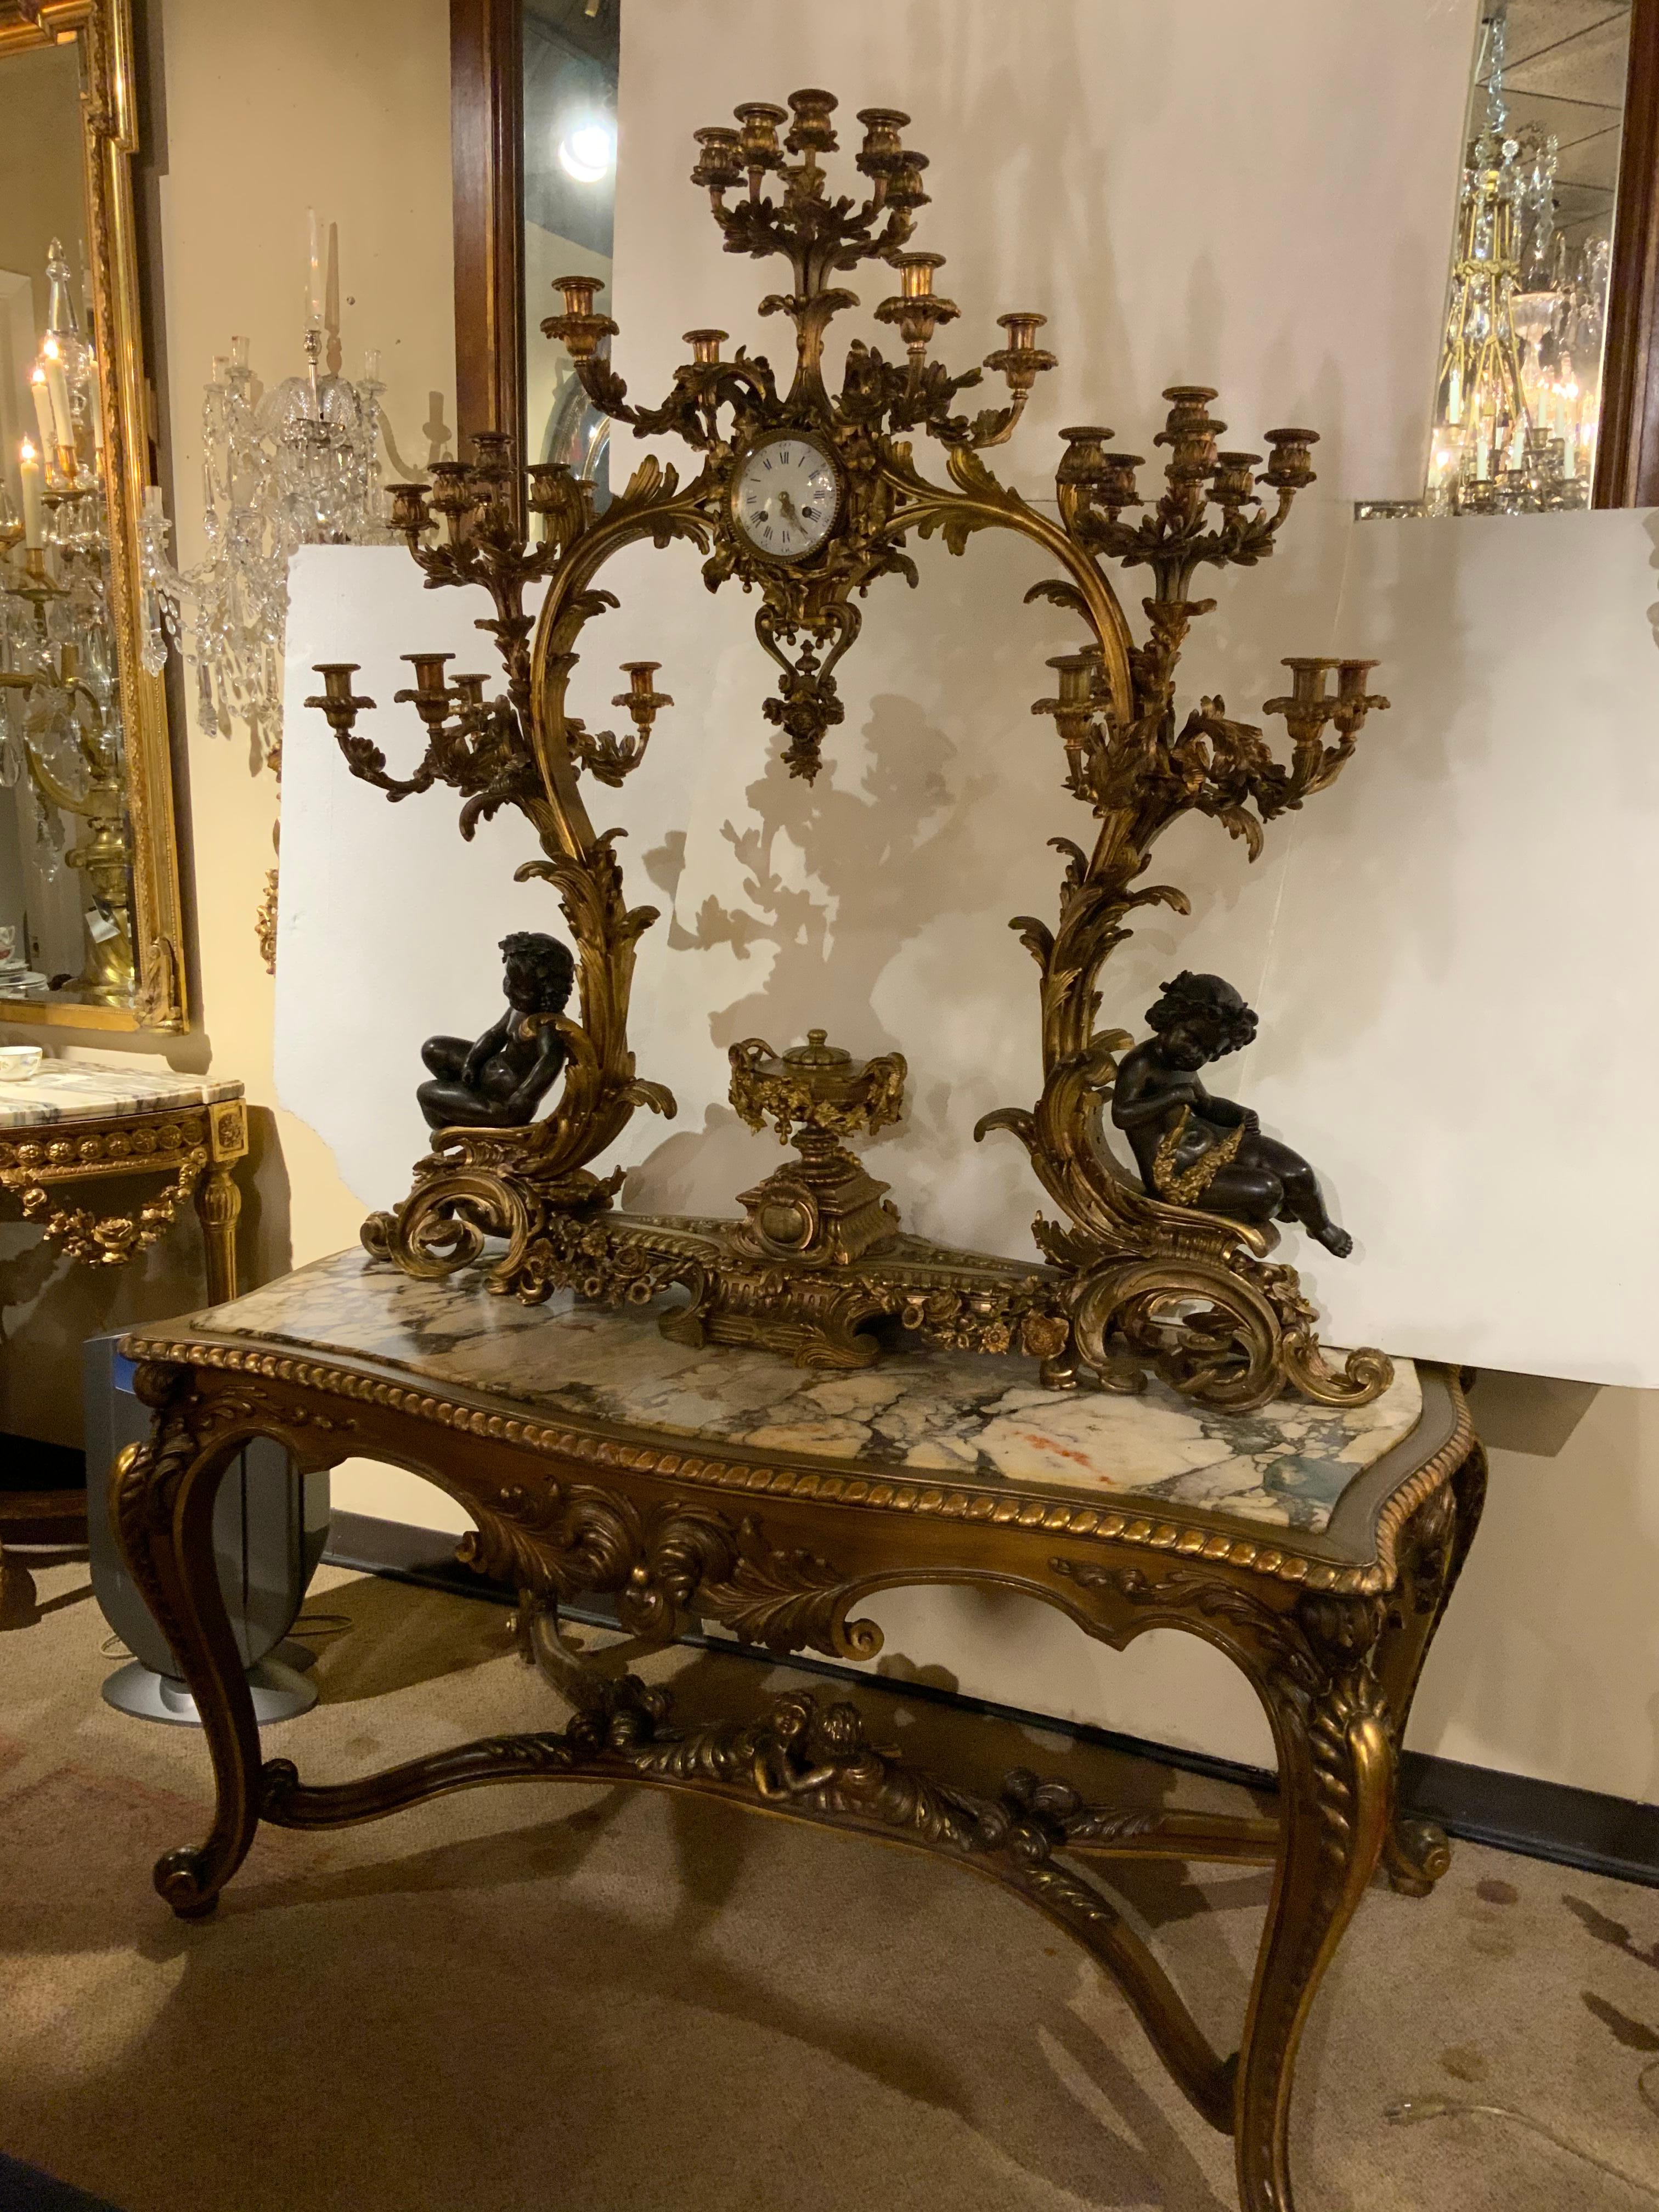 Exquisite and large scale French bronze doré and patinated bronze 
Elements Encase this exquisite clock presentation.
27 candelabra with scrolling arms decorate the entire piece.
The patina is original and brilliant.
This monumental presentation has